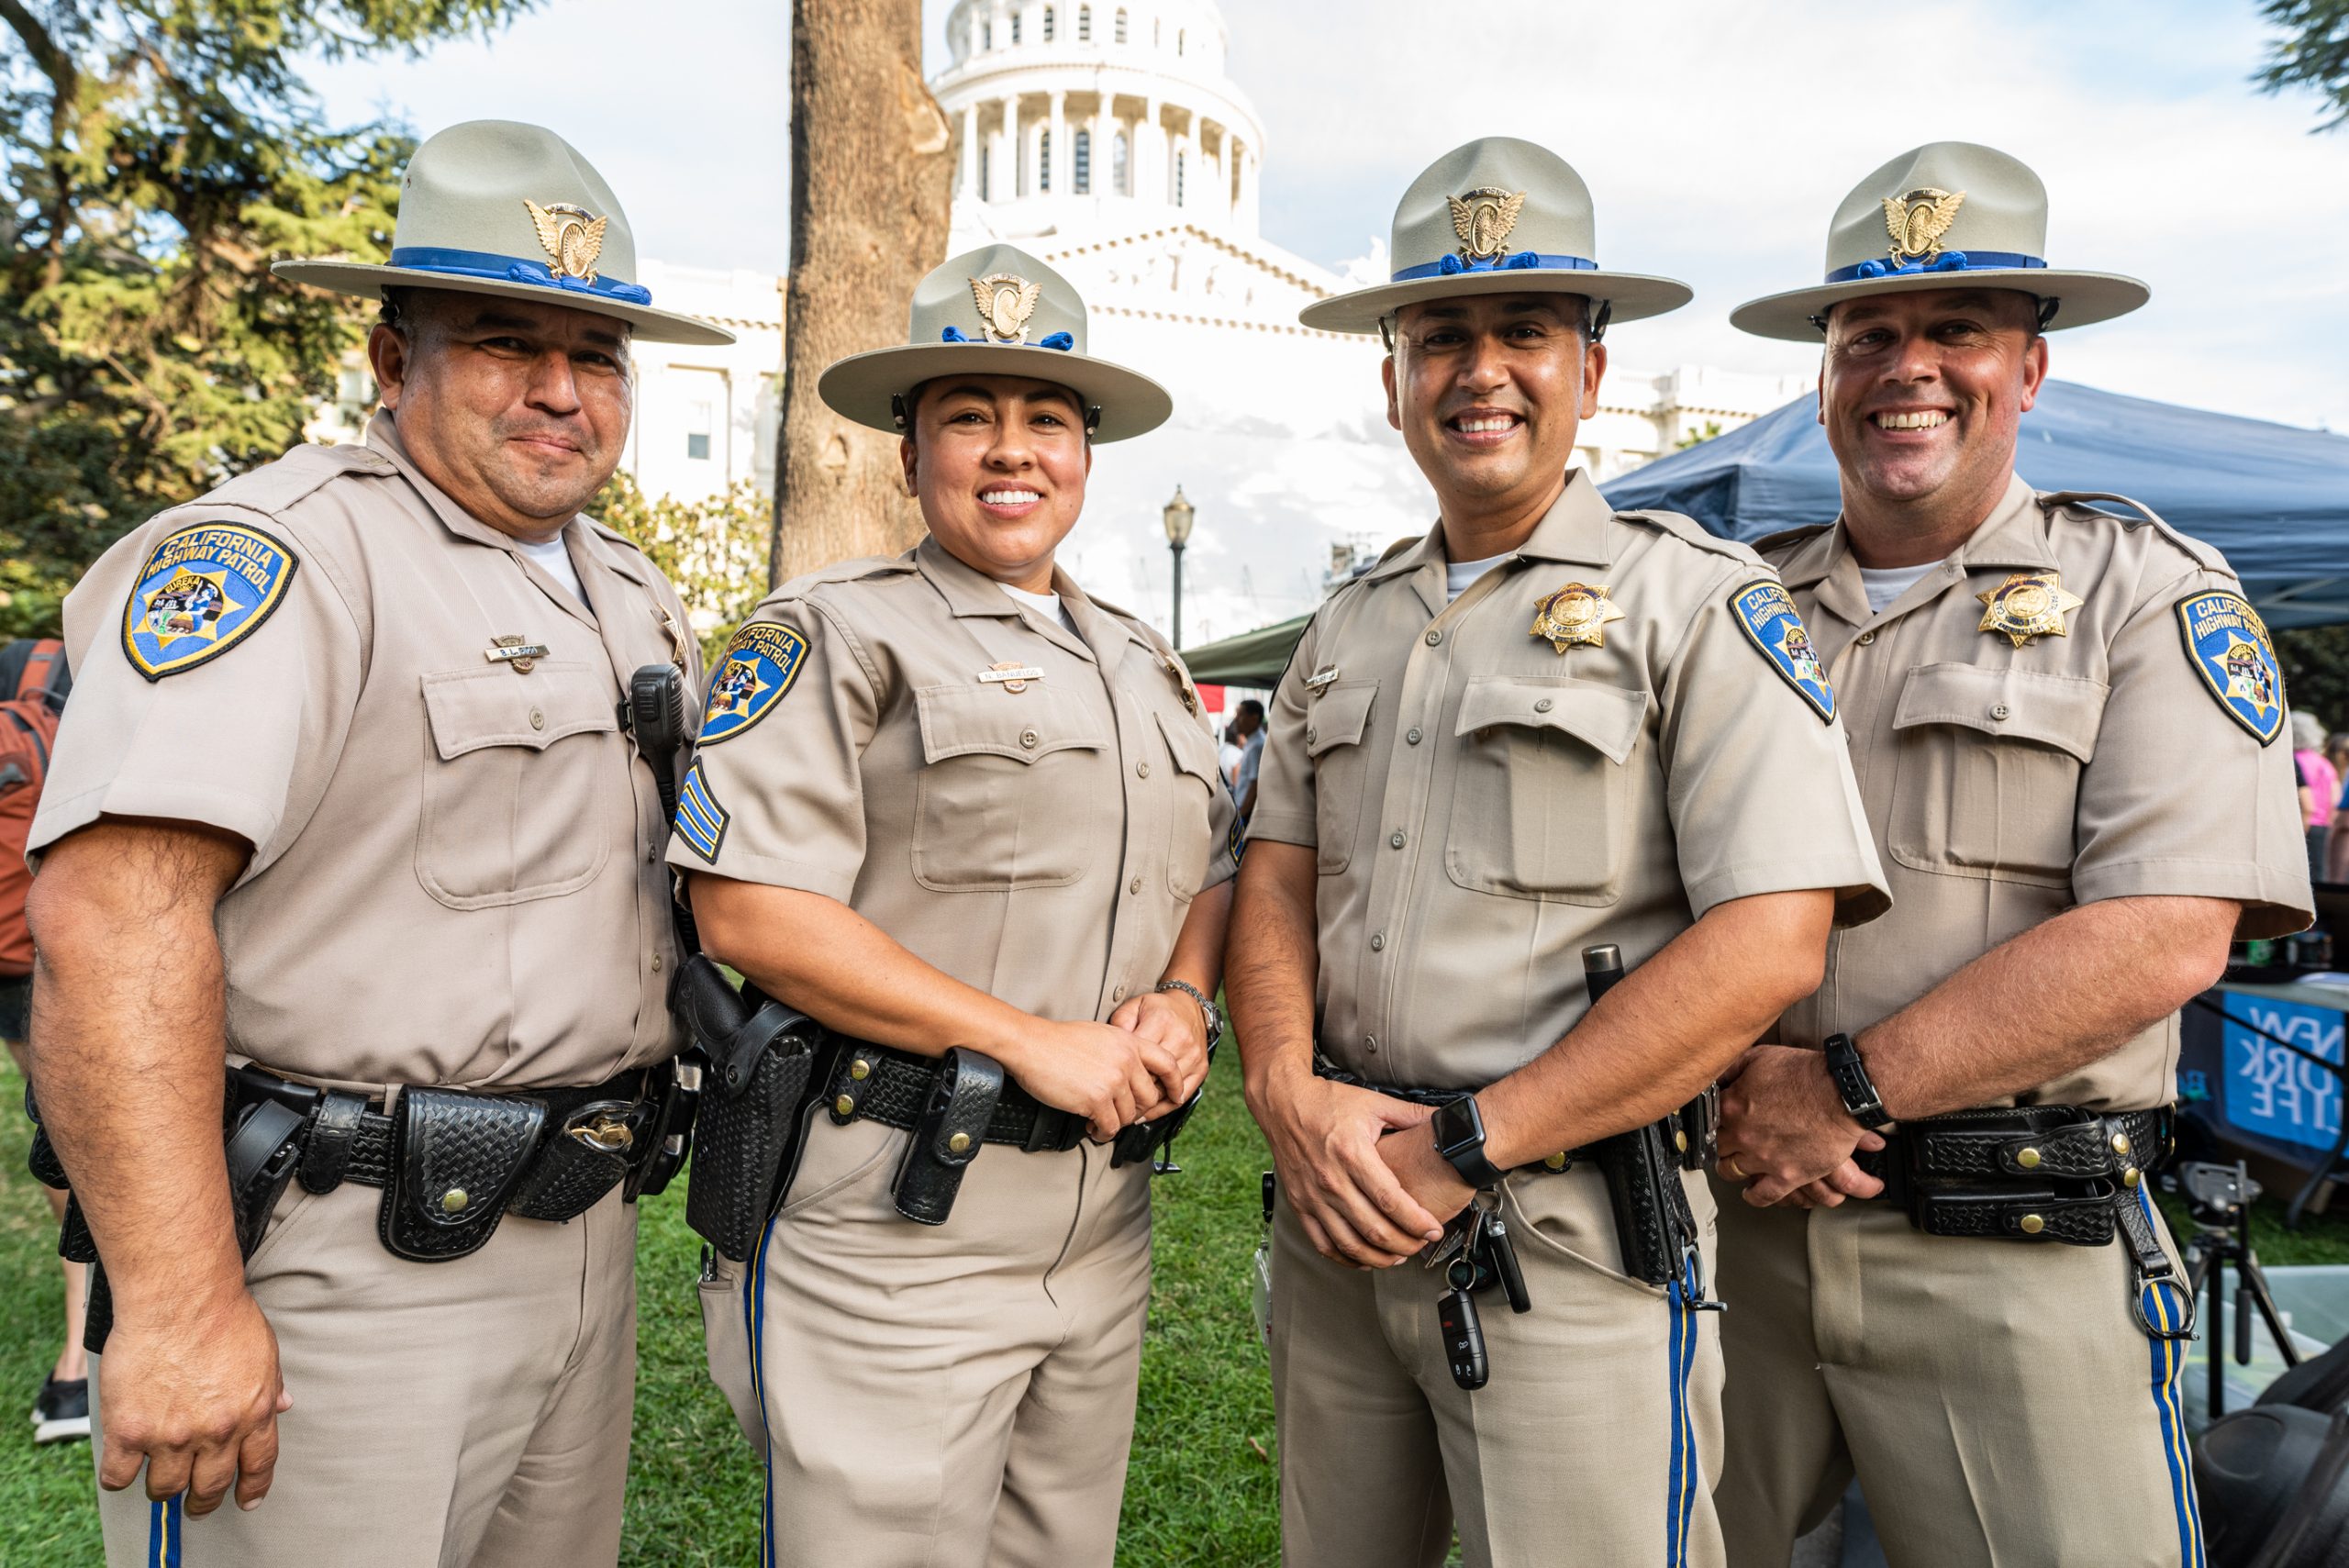 8 THINGS YOU MAY NOT KNOW ABOUT THE CHP